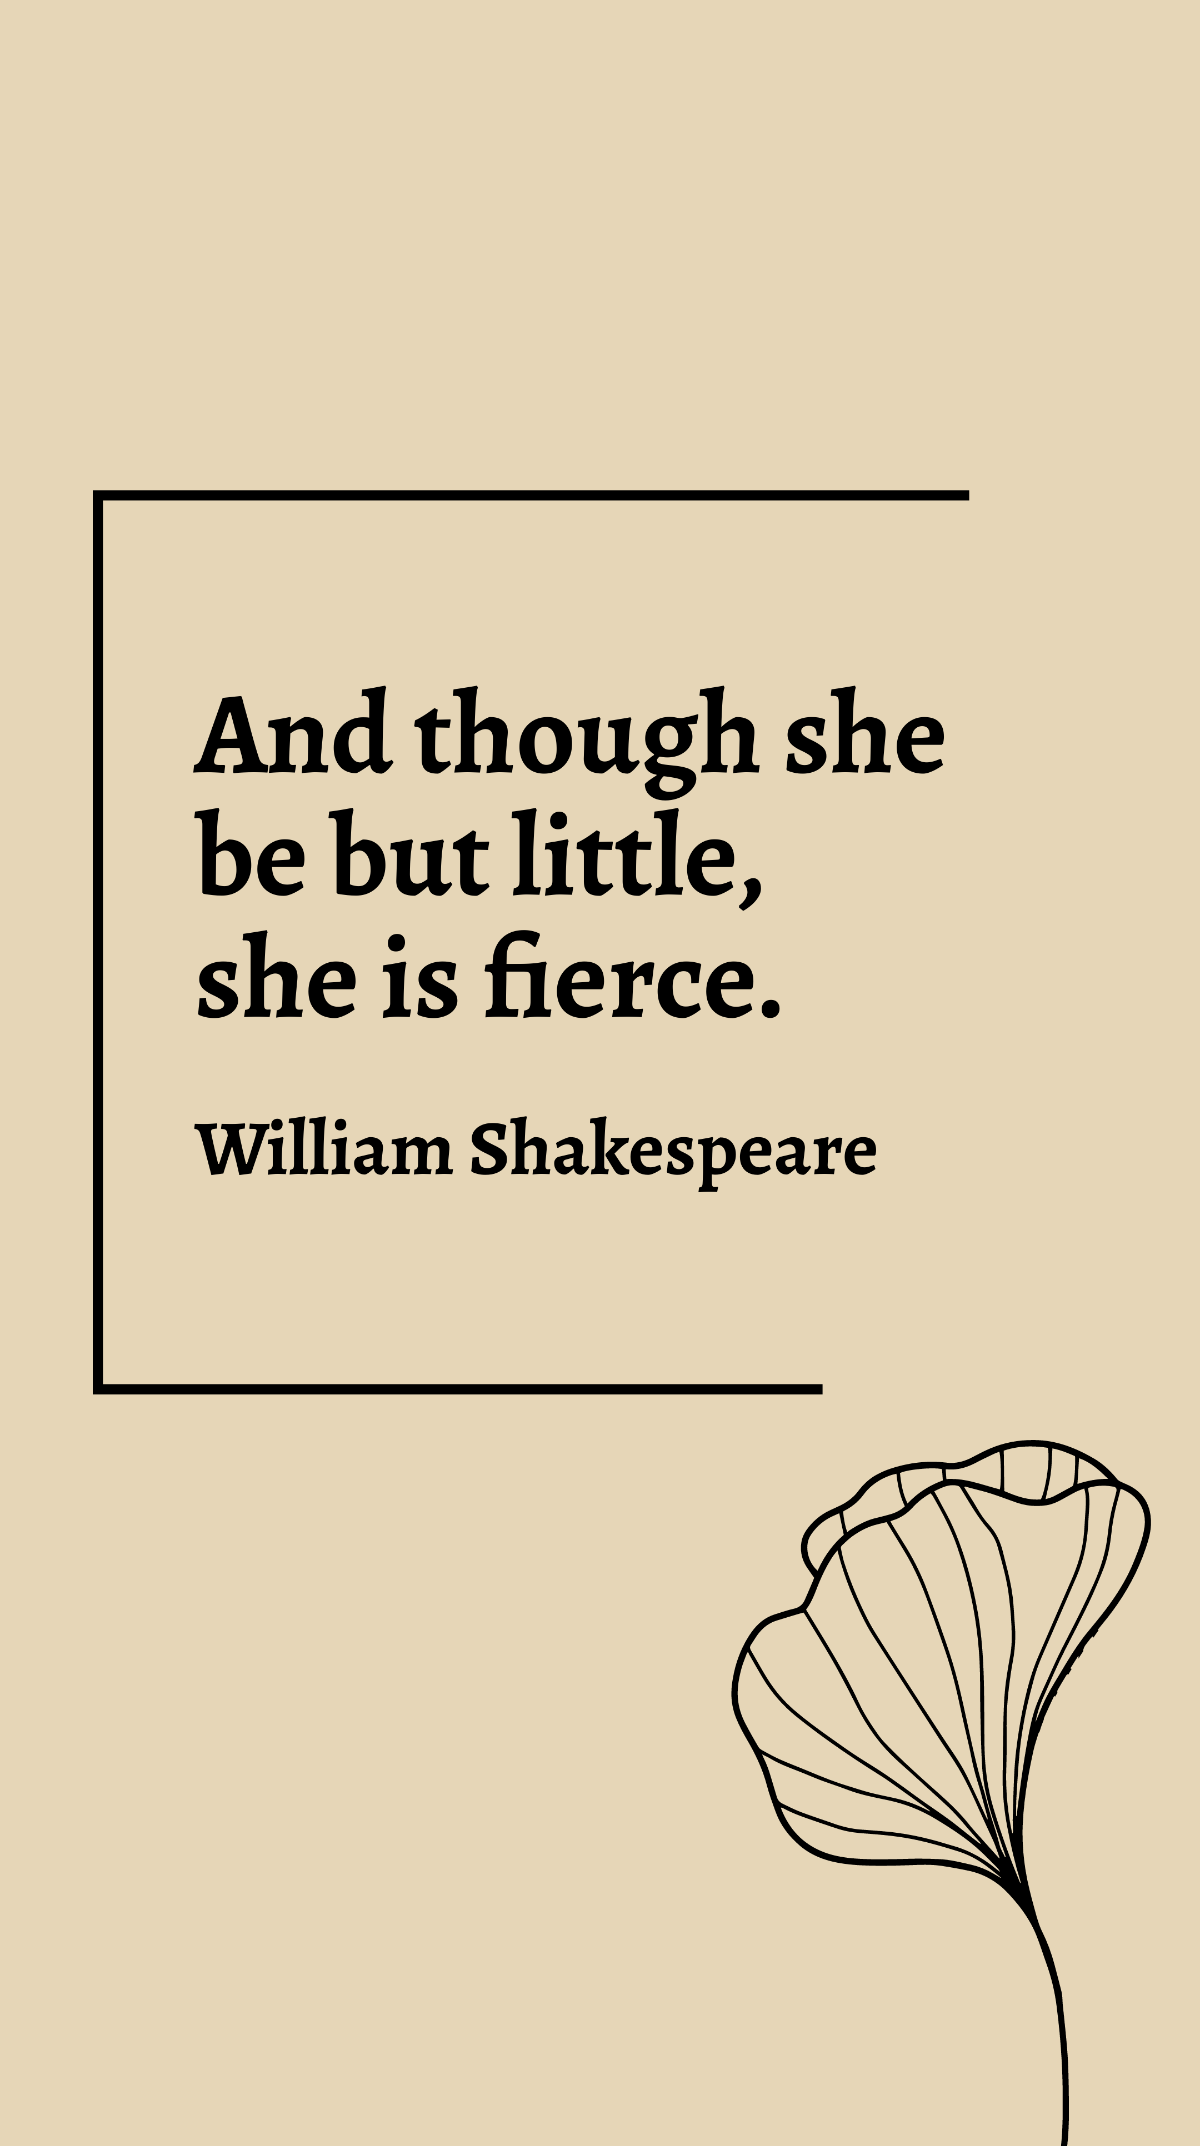 William Shakespeare - And though she be but little, she is fierce. Template